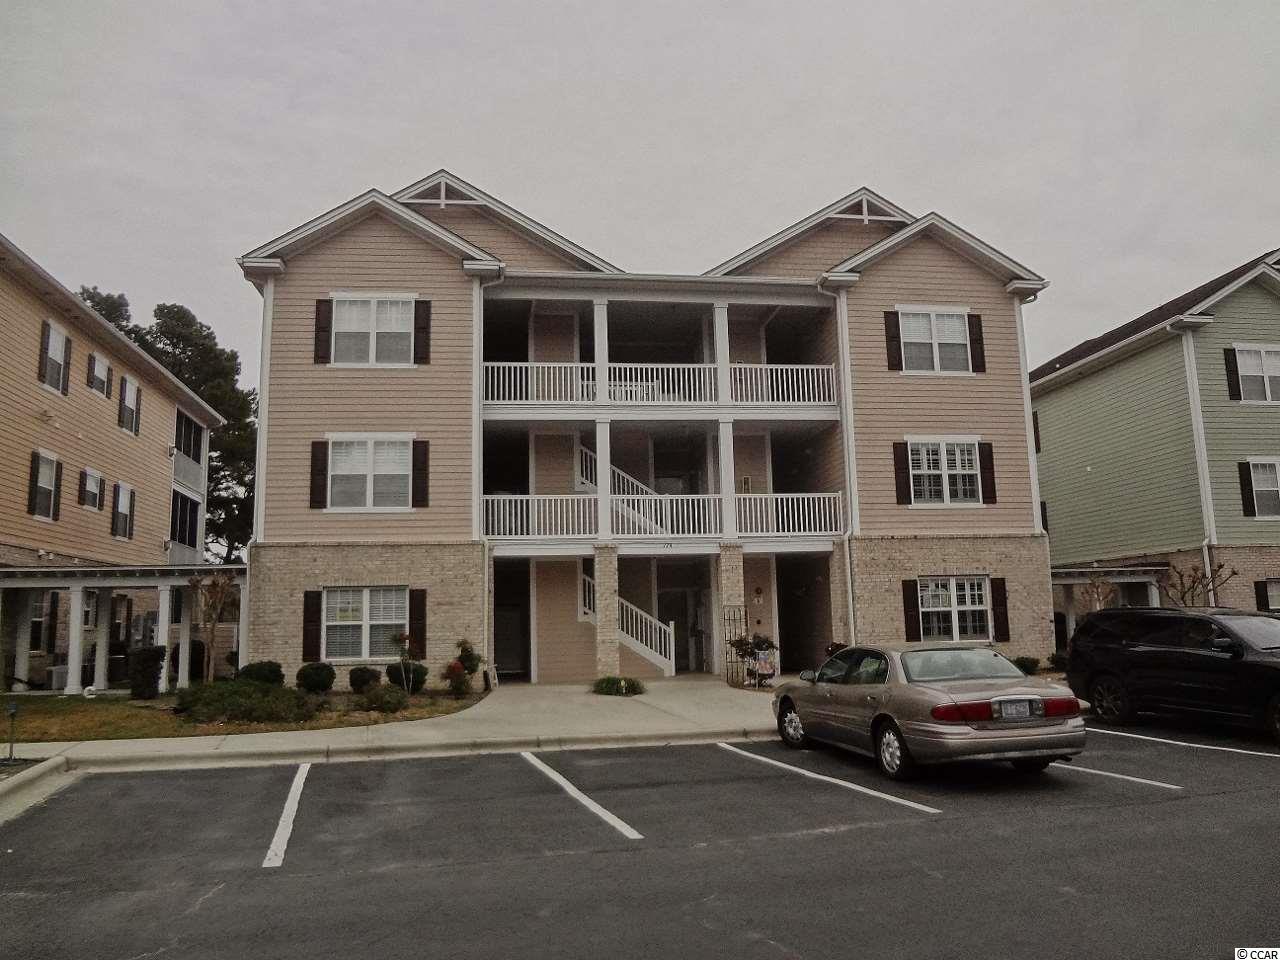 174 Clubhouse Rd. UNIT #2 Sunset Beach, NC 28468